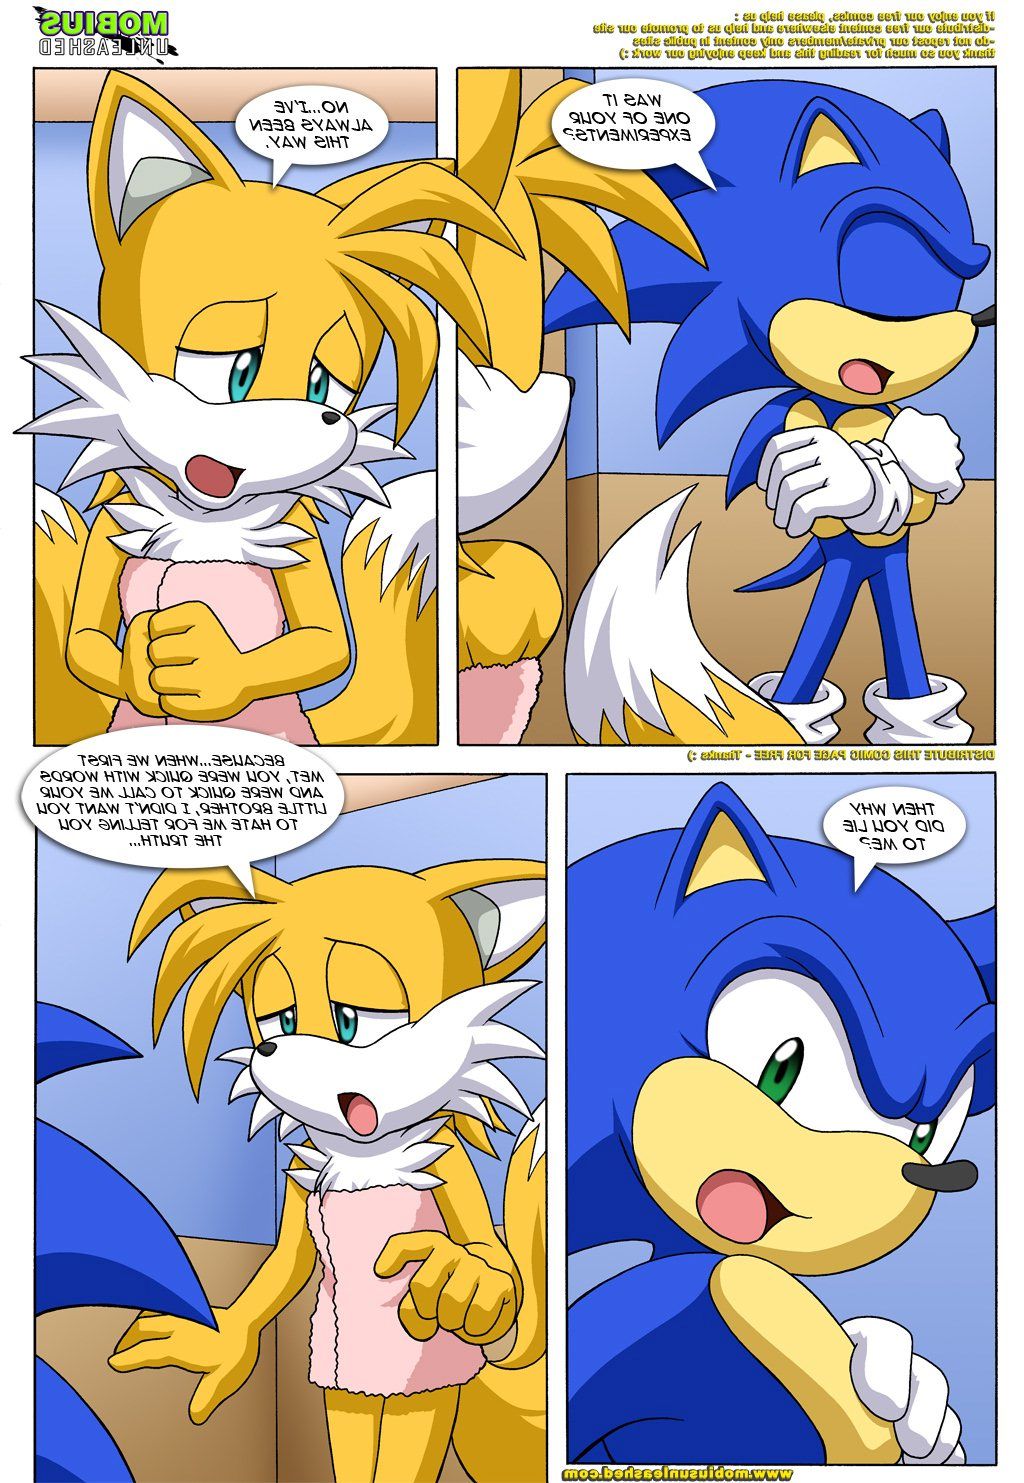 pal-comix-tails-tales image_13452.jpg